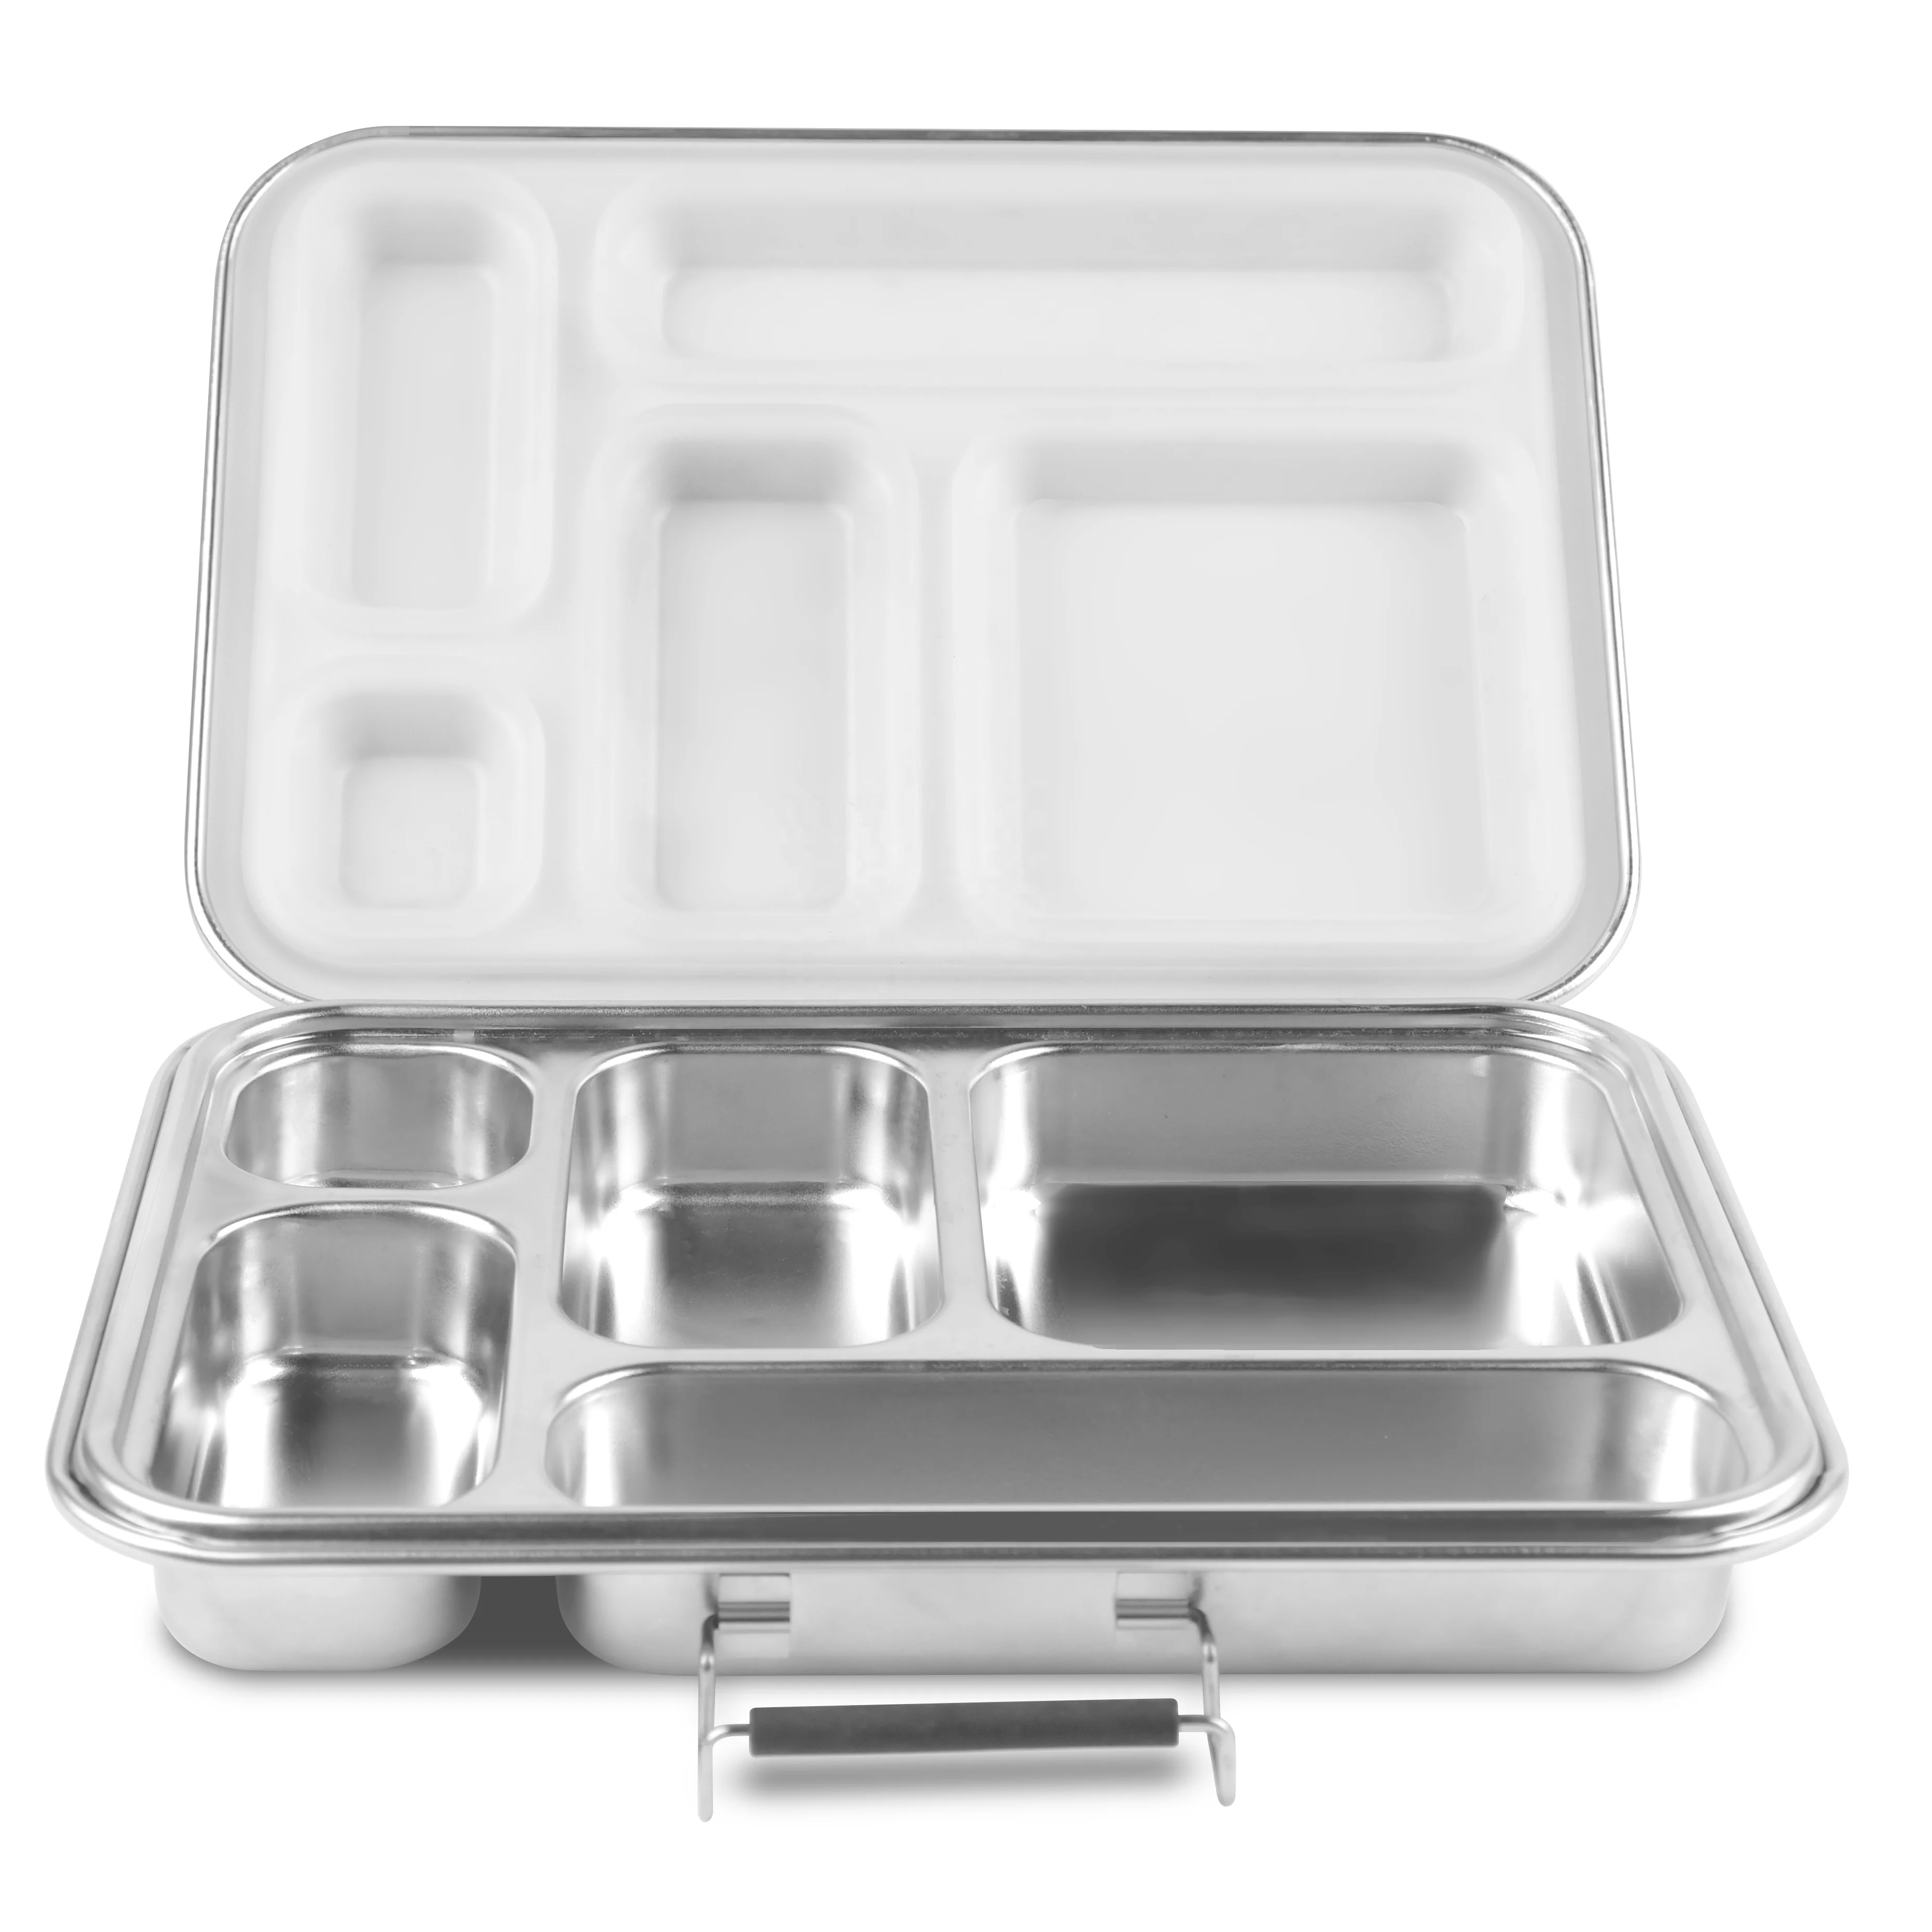 

OUMEGO Eco friendly Custom leak proof stainless steel bento lunch box lunchbox for adult kids 5 compartment metal lunch box